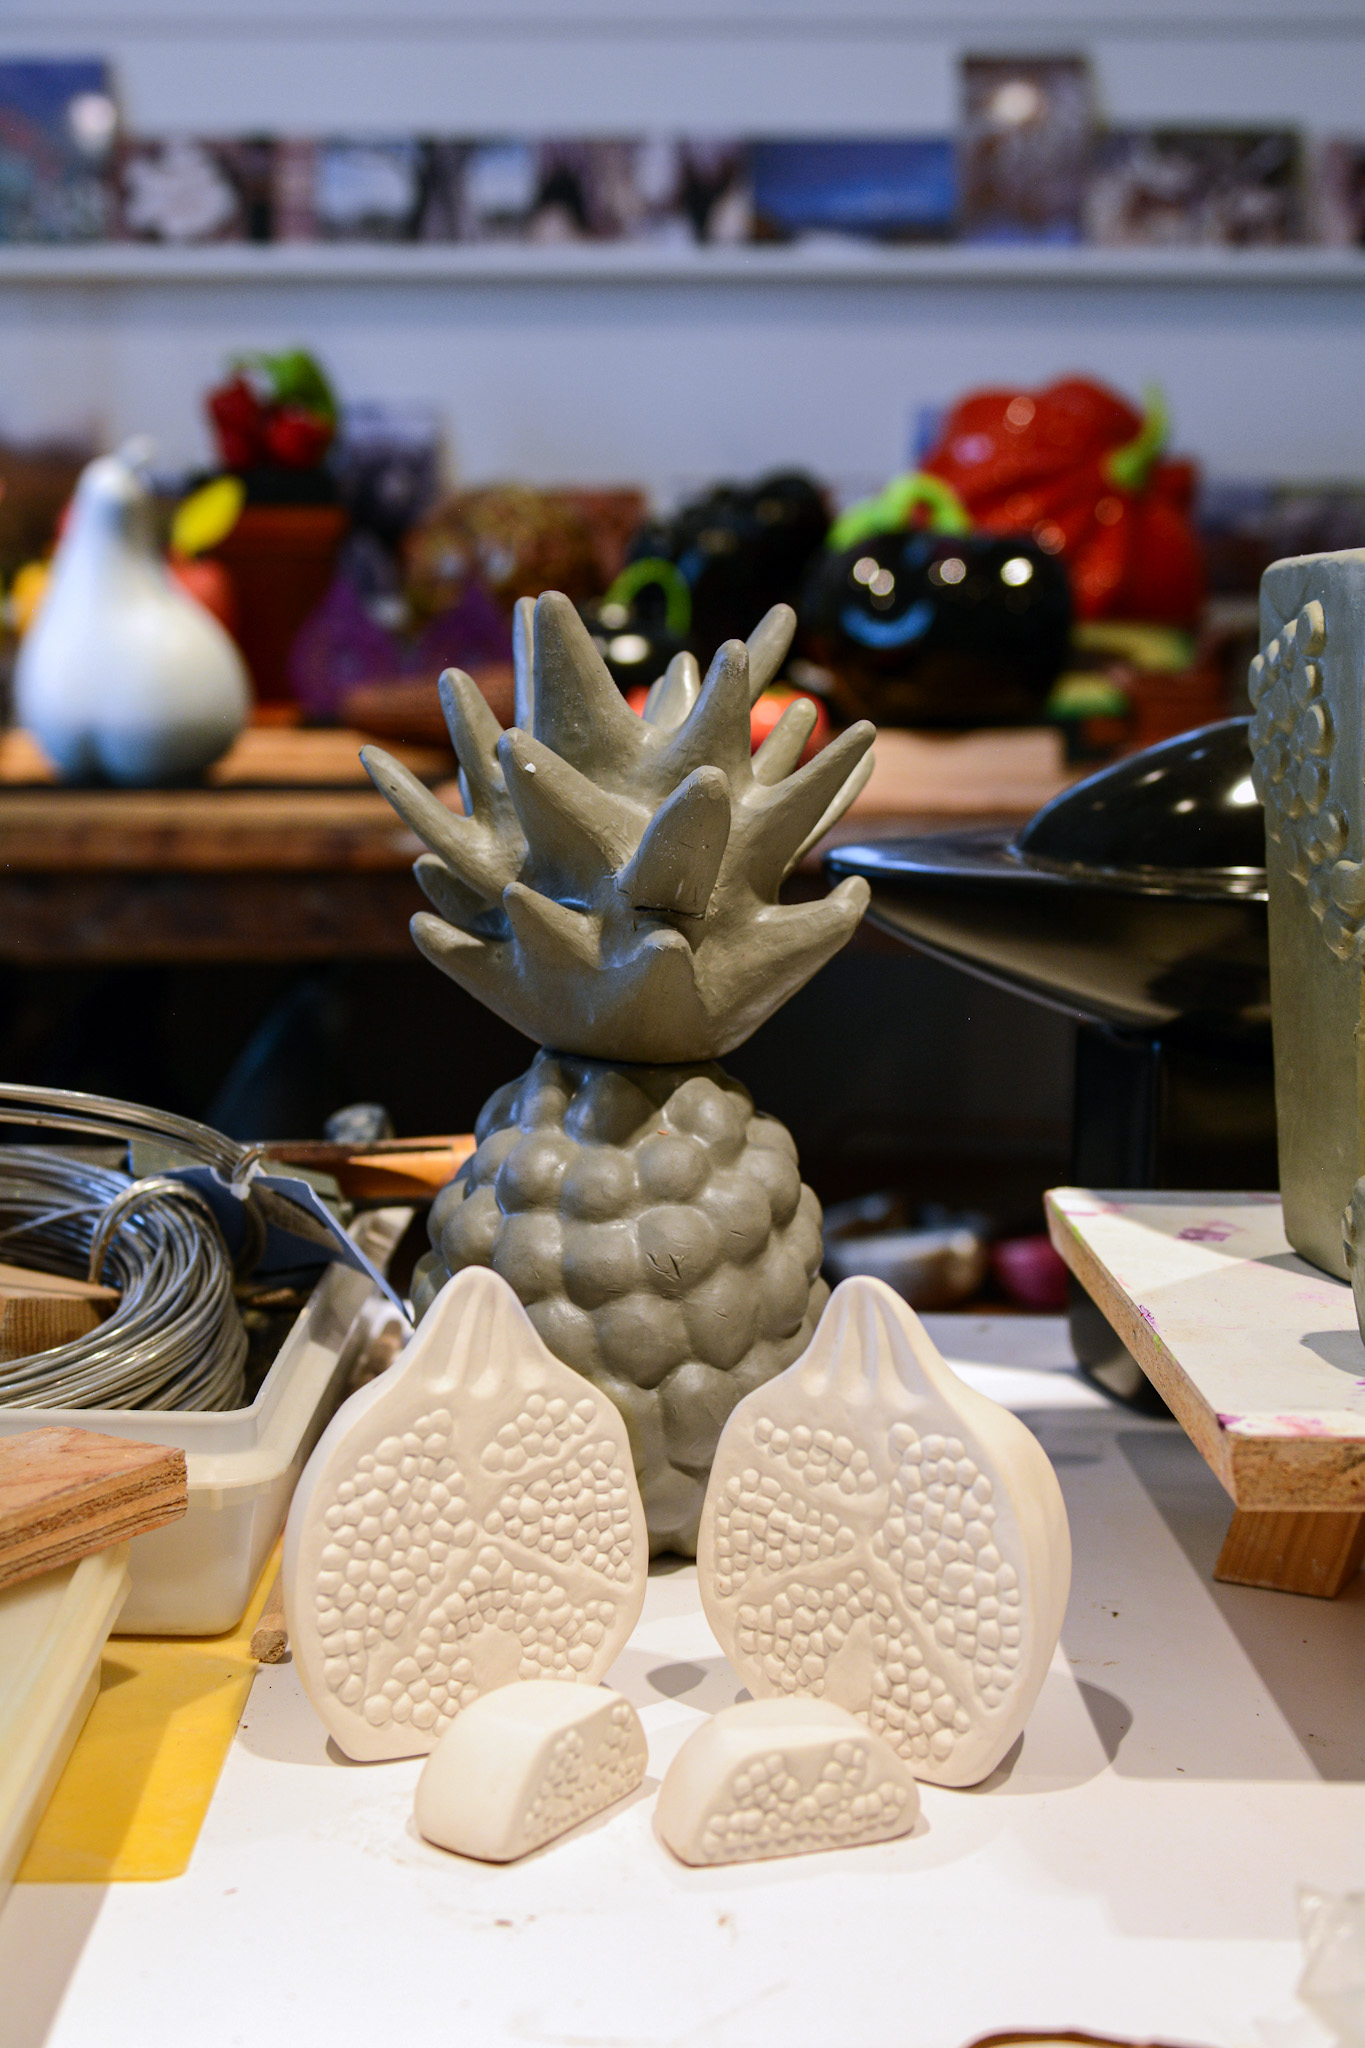 Unfinished sculptures, including pineapple and pomegranate pieces, in Jan's studio.